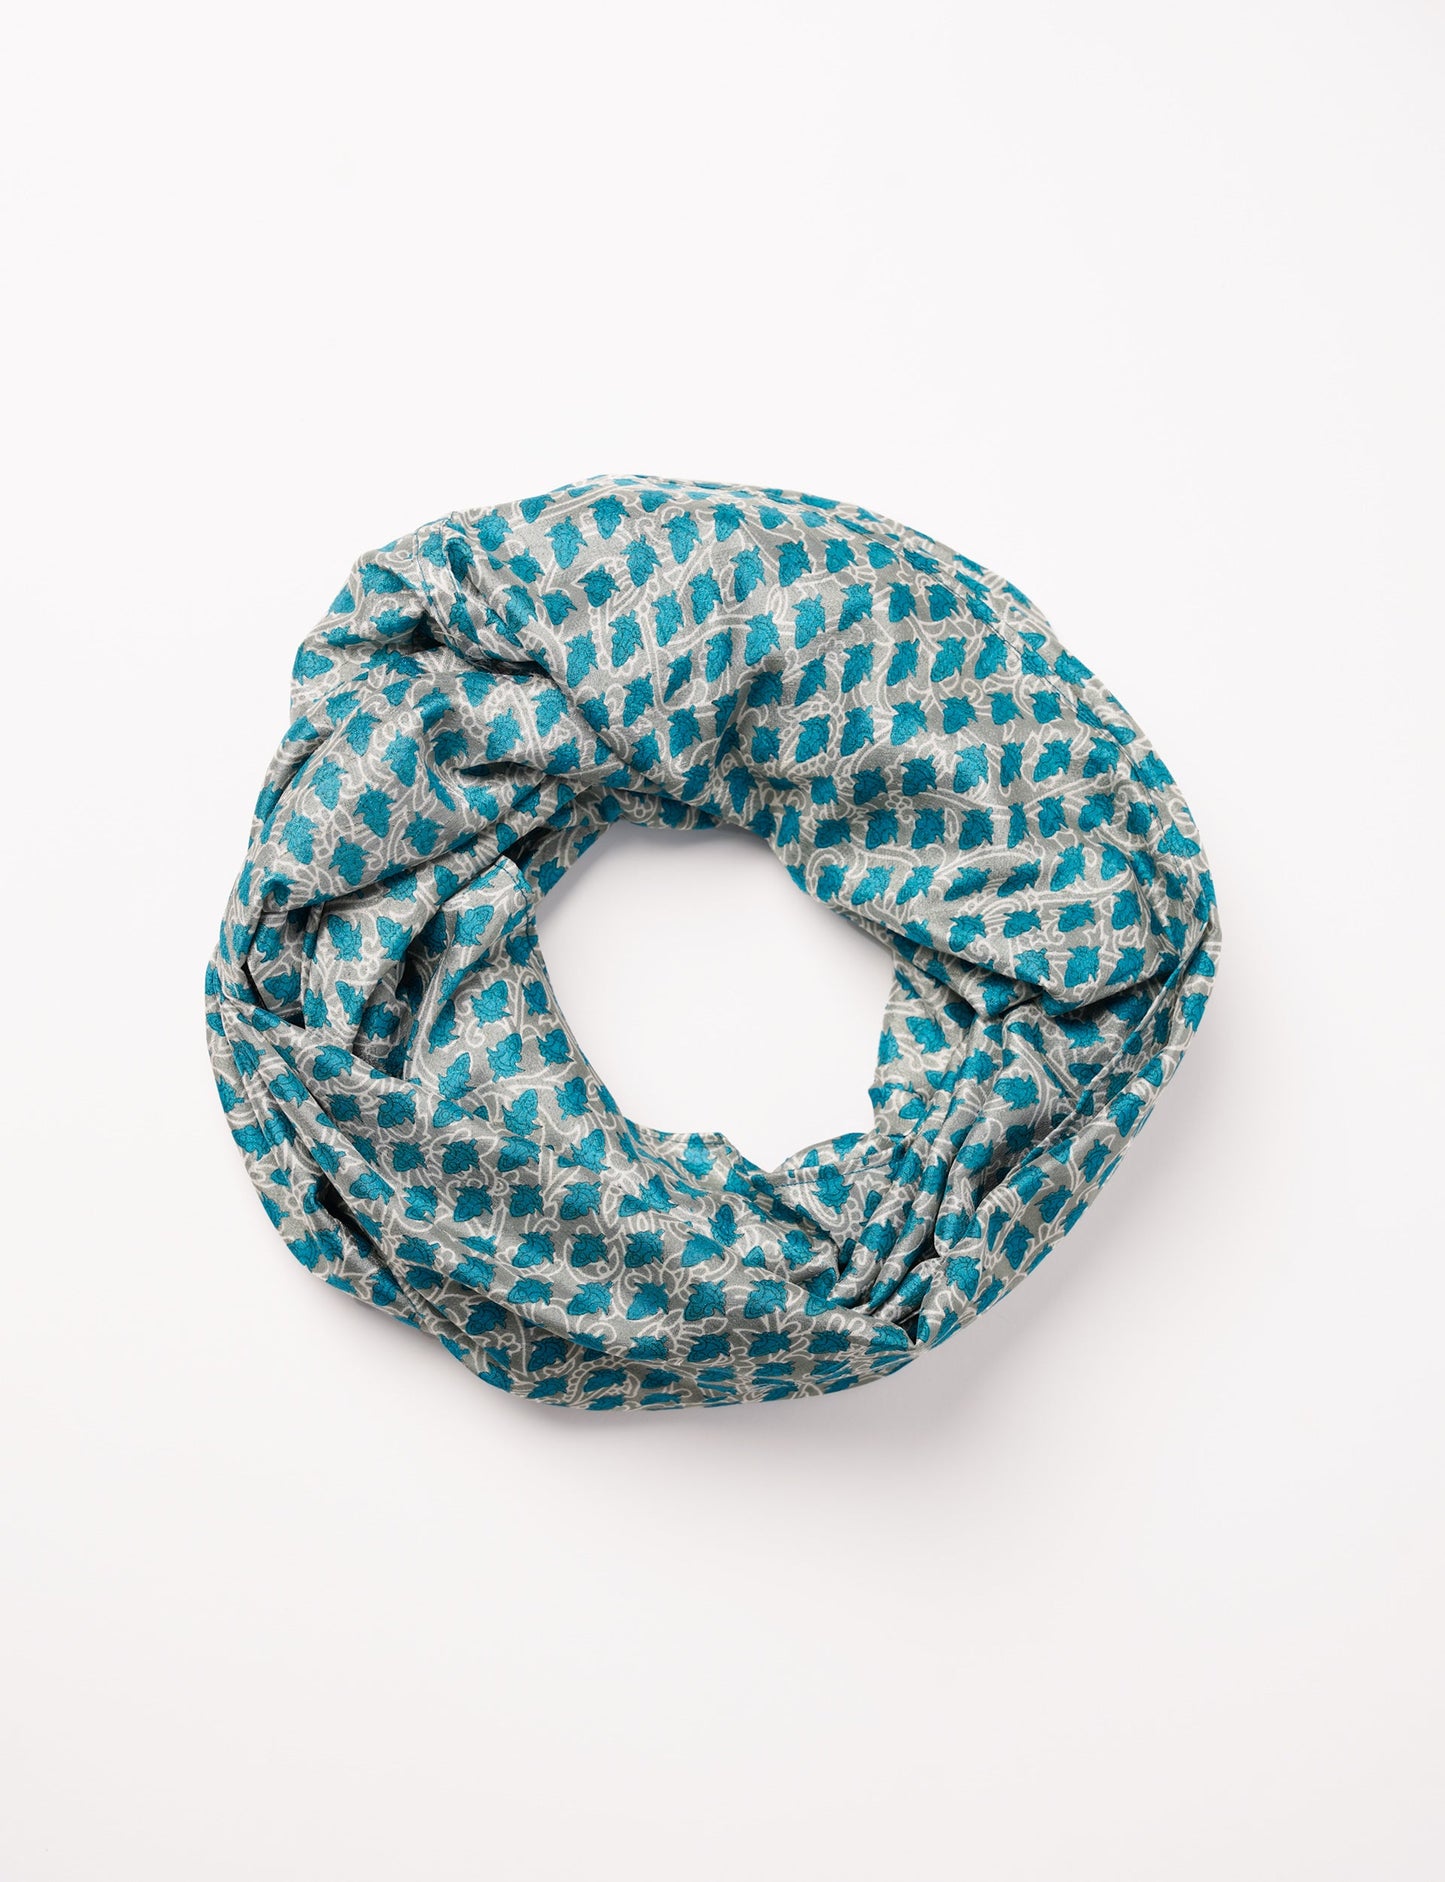 Sustainable style embraces you with our LOOP SCARF – an infinity-style scarf crafted from vibrant, pattern-rich saris. Handcrafted by experienced Mumbai-based artisans, this versatile scarf can be worn looped once or twice around your neck or as a head-wrap. From laid-back beach vacations to dress-to-impress dinners, this scarf is a timeless accessory.